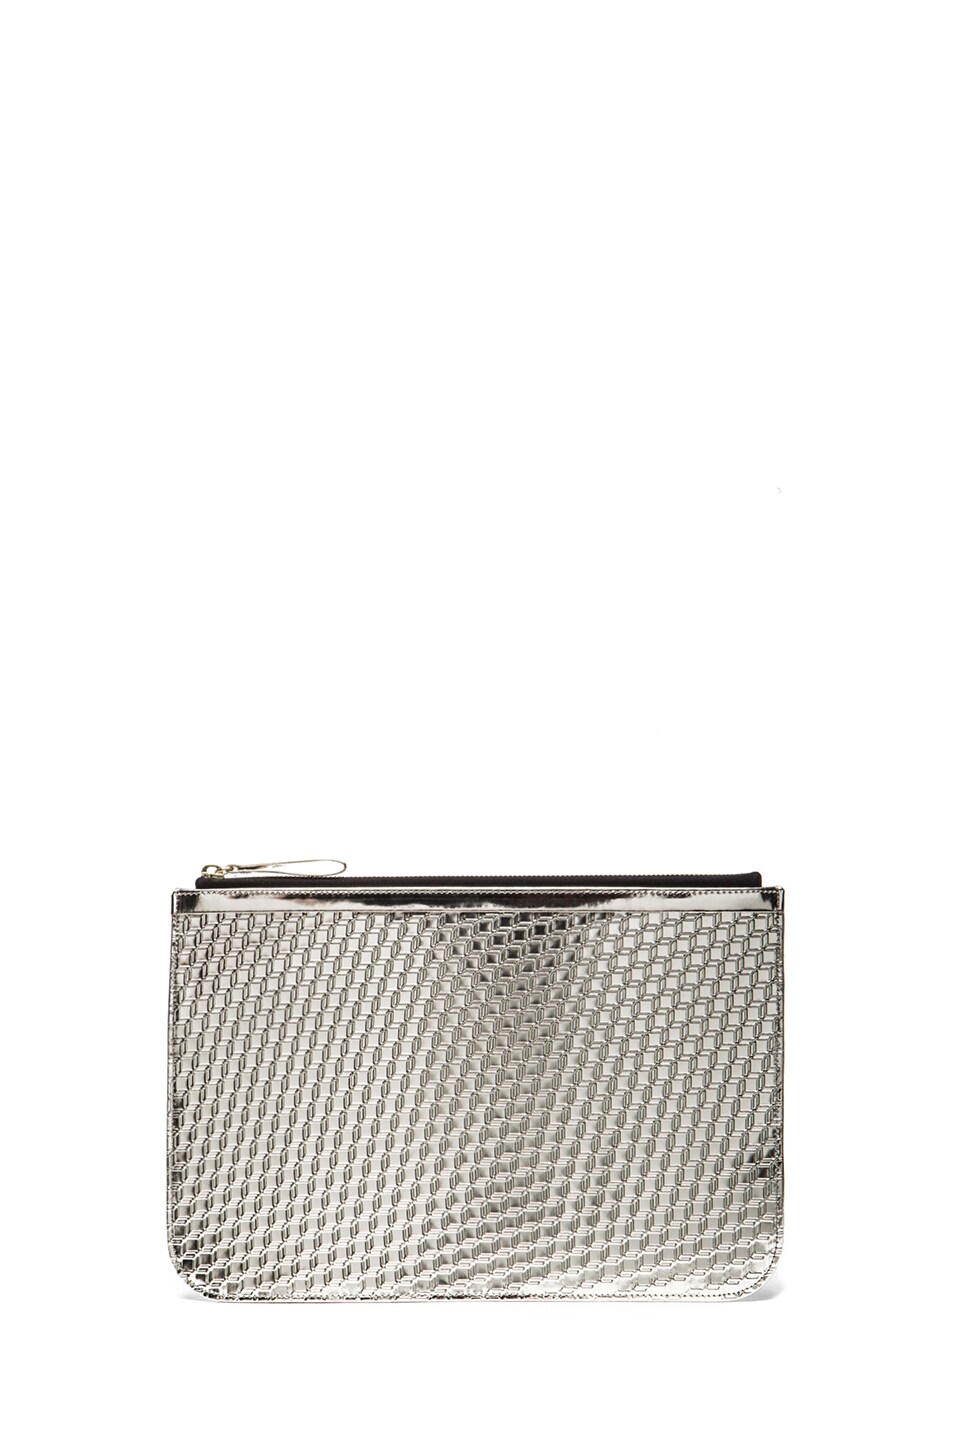 Pierre Hardy Large Patent Pouch in Silver | FWRD